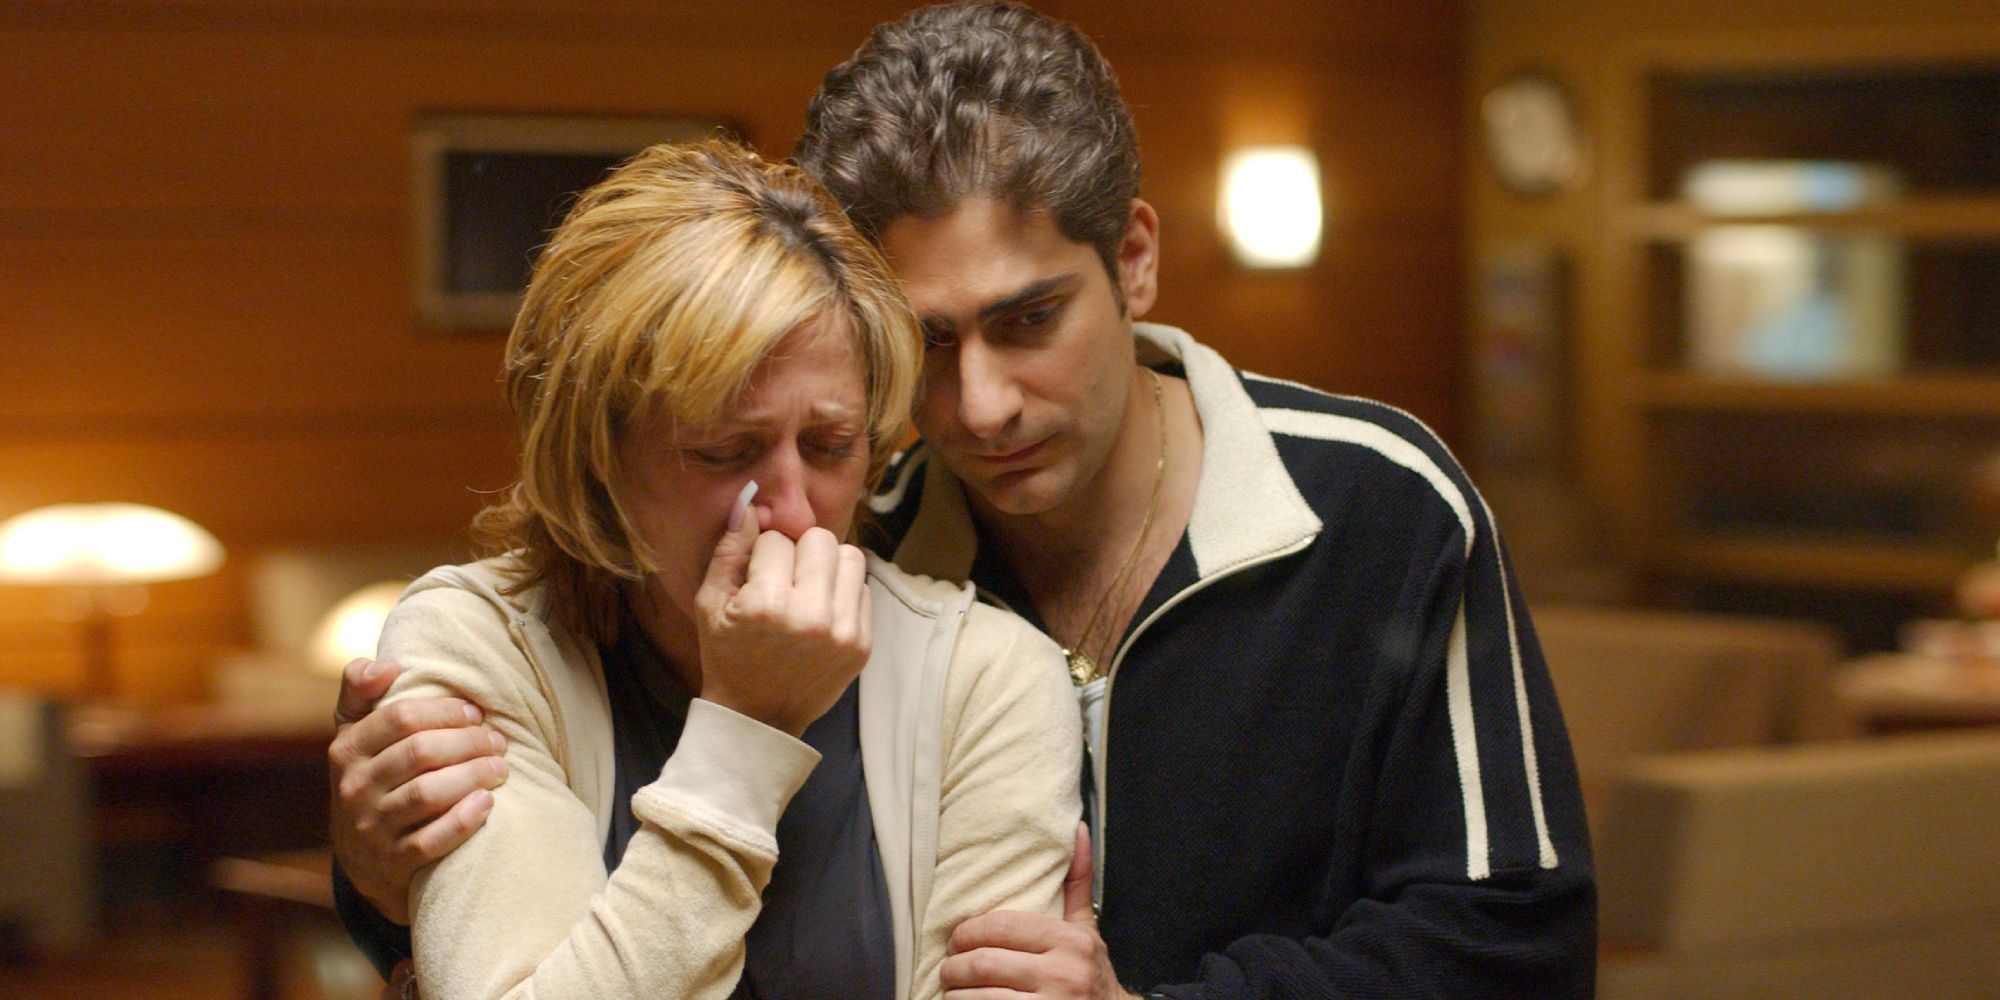 Christopher consoling a crying Carmela in The Sopranos